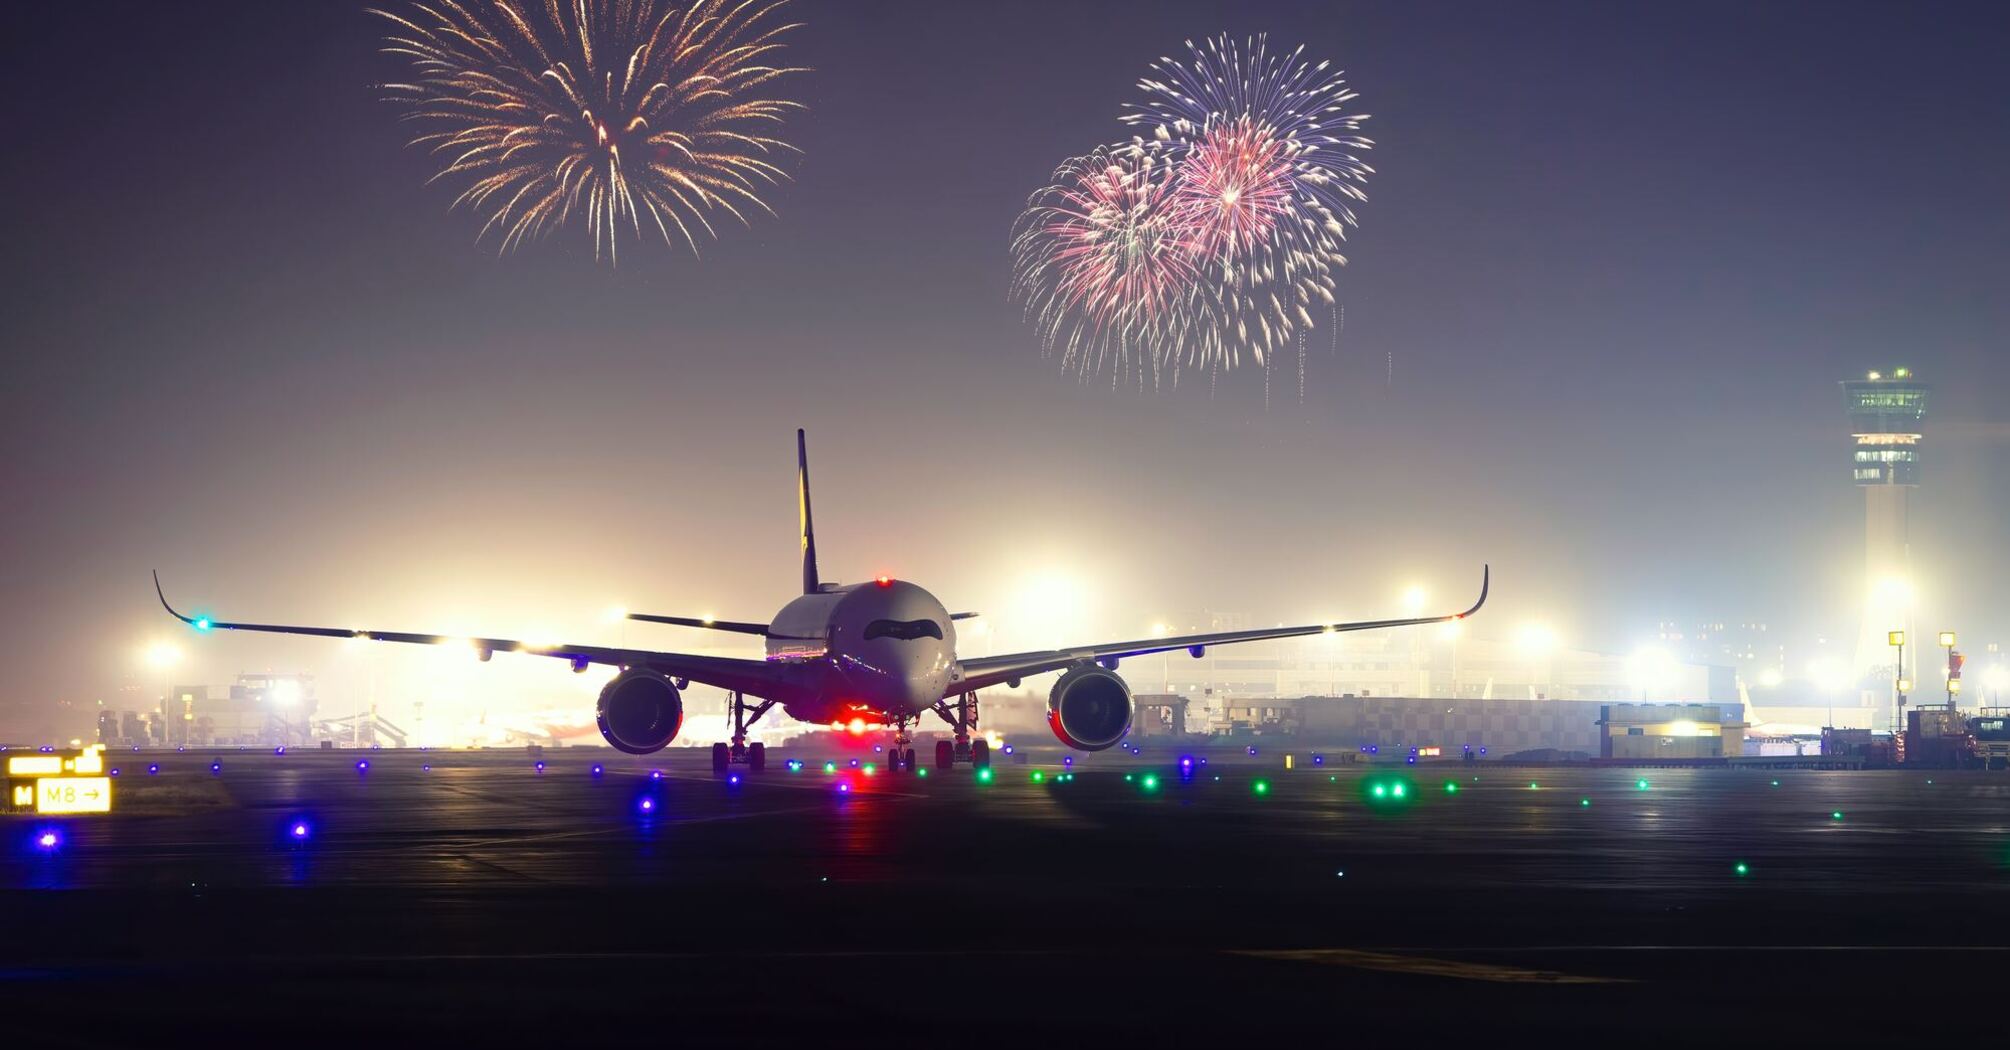 A commercial airplane on a runway at dusk with fireworks in the background